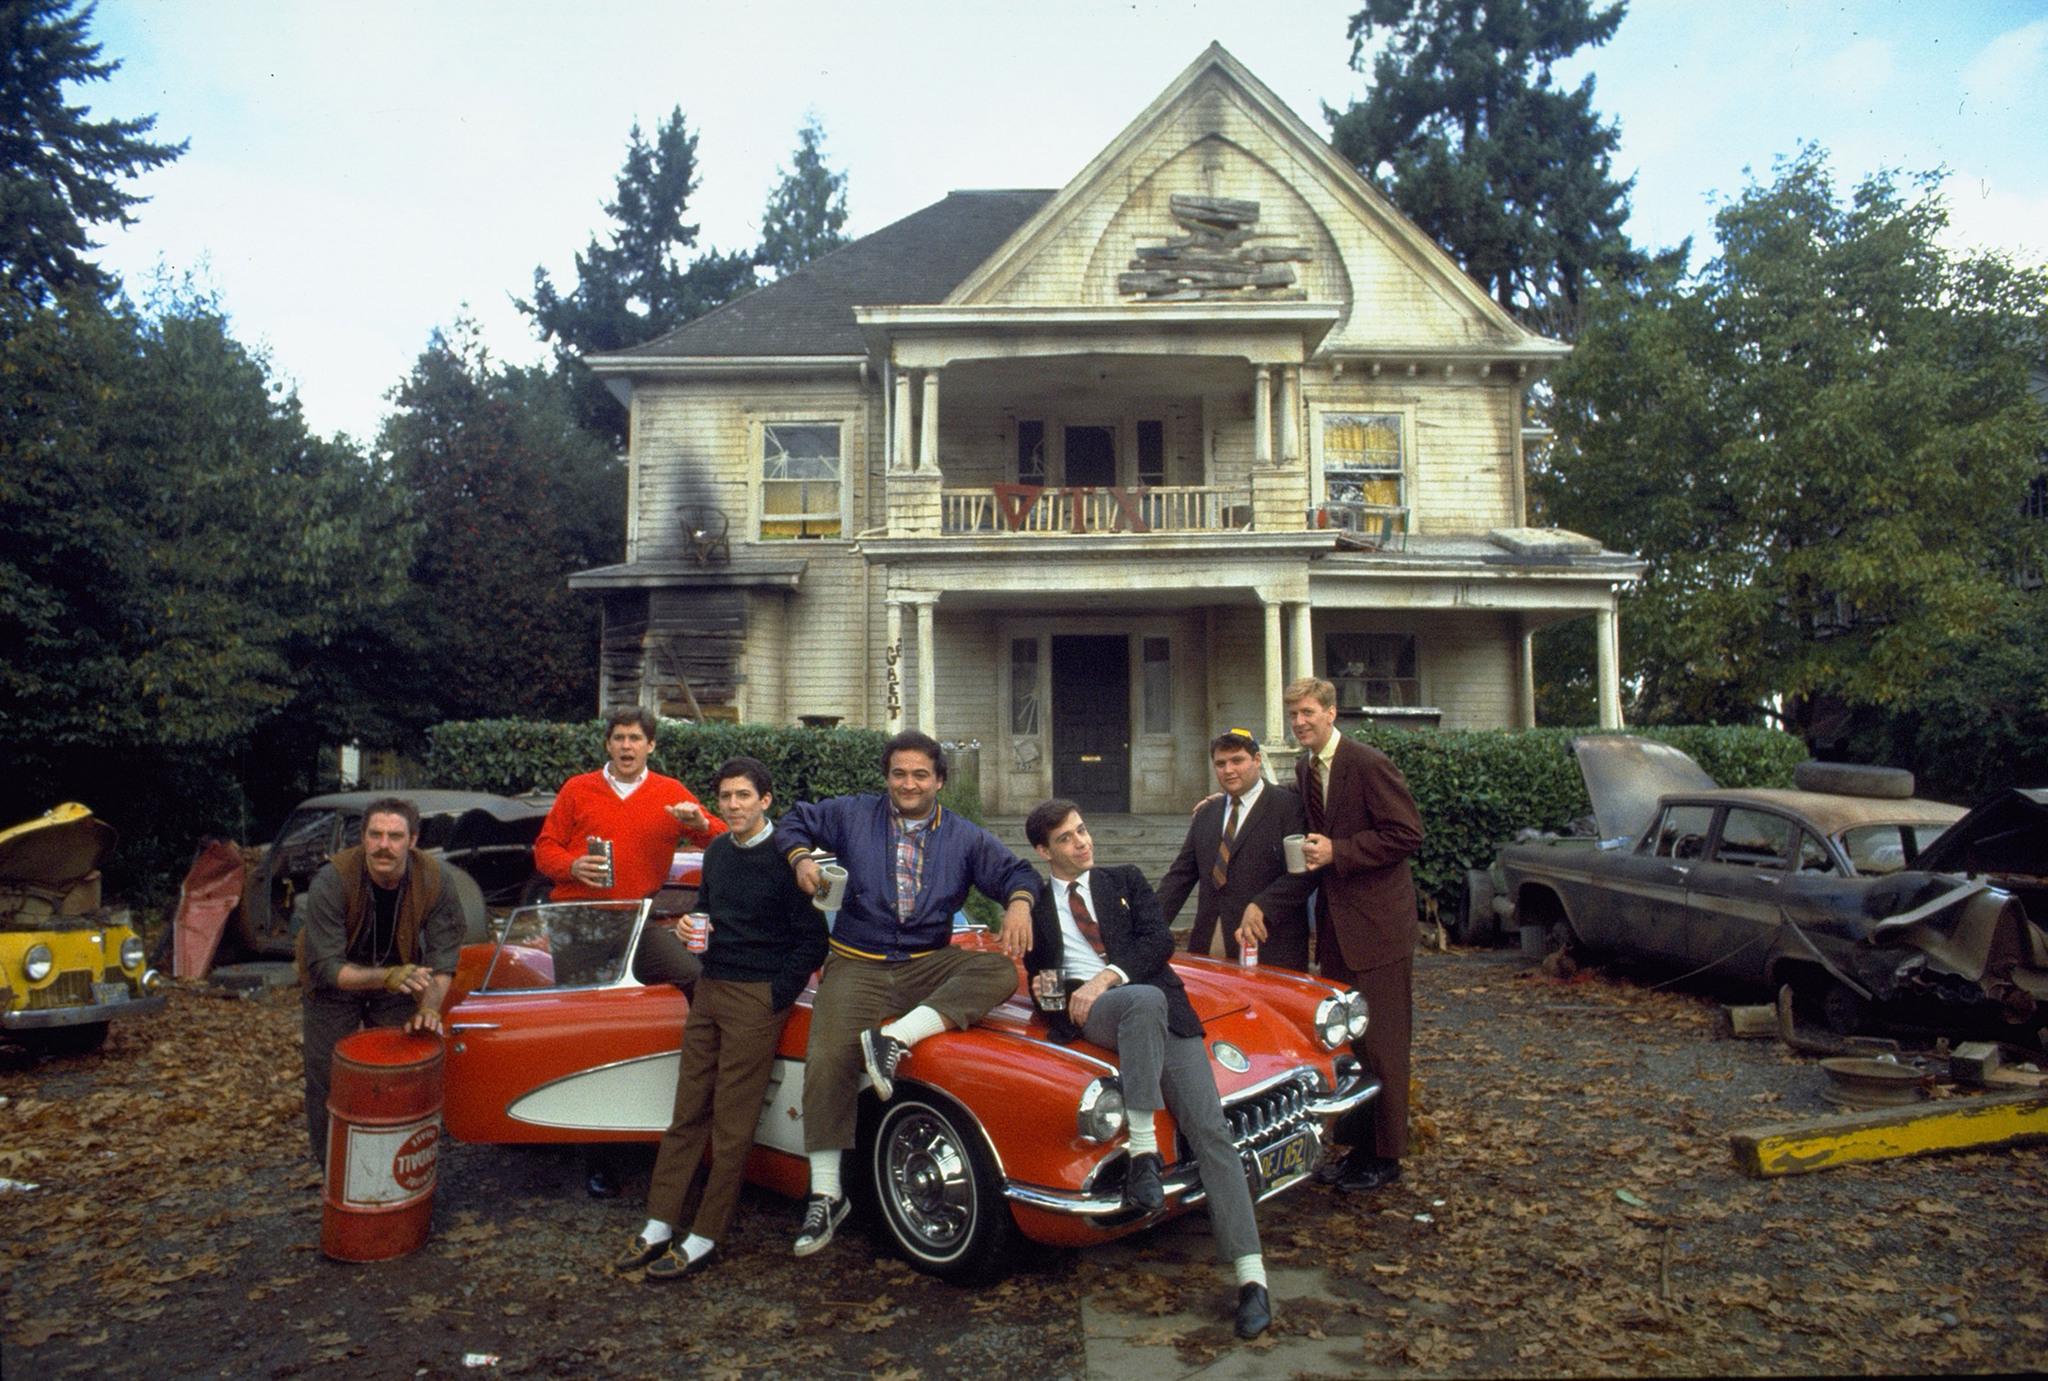 still-of-john-belushi_-tom-hulce_-tim-matheson_-stephen-furst_-bruce-mcgill_-peter-riegert-and-james-widdoes-in-animal-house-_1978_-large-picture.jpg